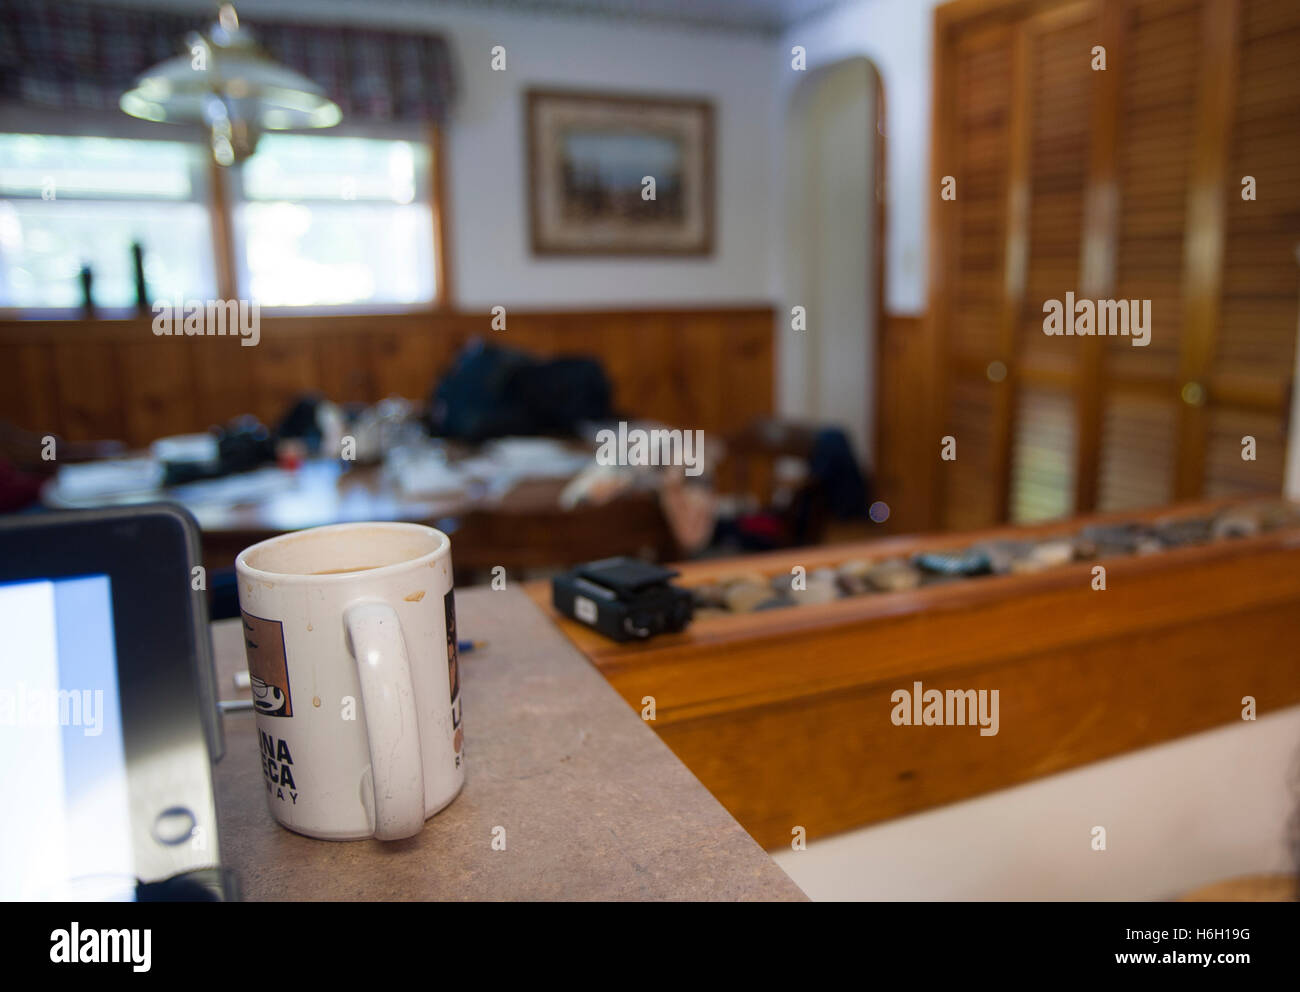 An almost full coffee mug sits a counter in a kitchen in a very typical home scene. Stock Photo